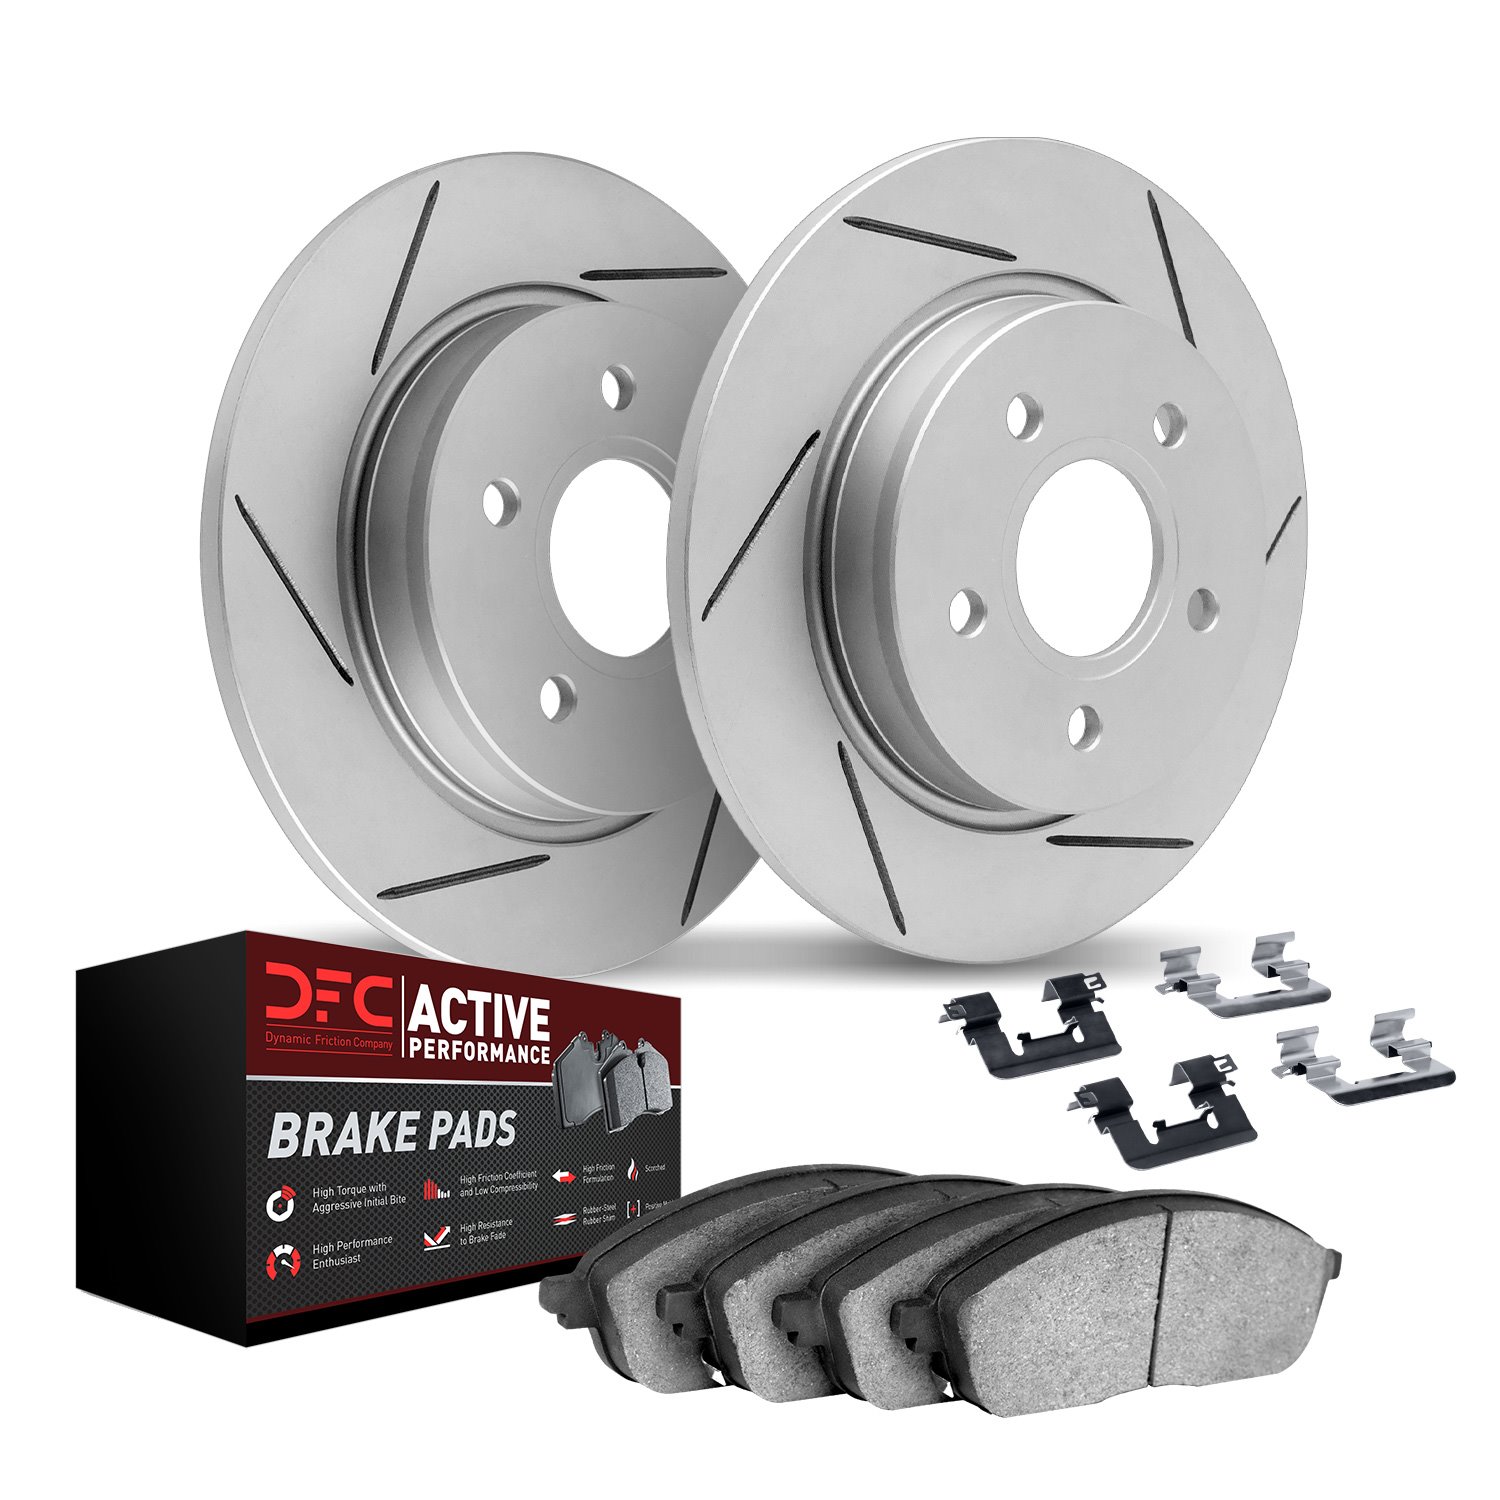 2712-67033 Geoperformance Slotted Brake Rotors with Active Performance Pads Kits & Hardware, Fits Select Multiple Makes/Models,